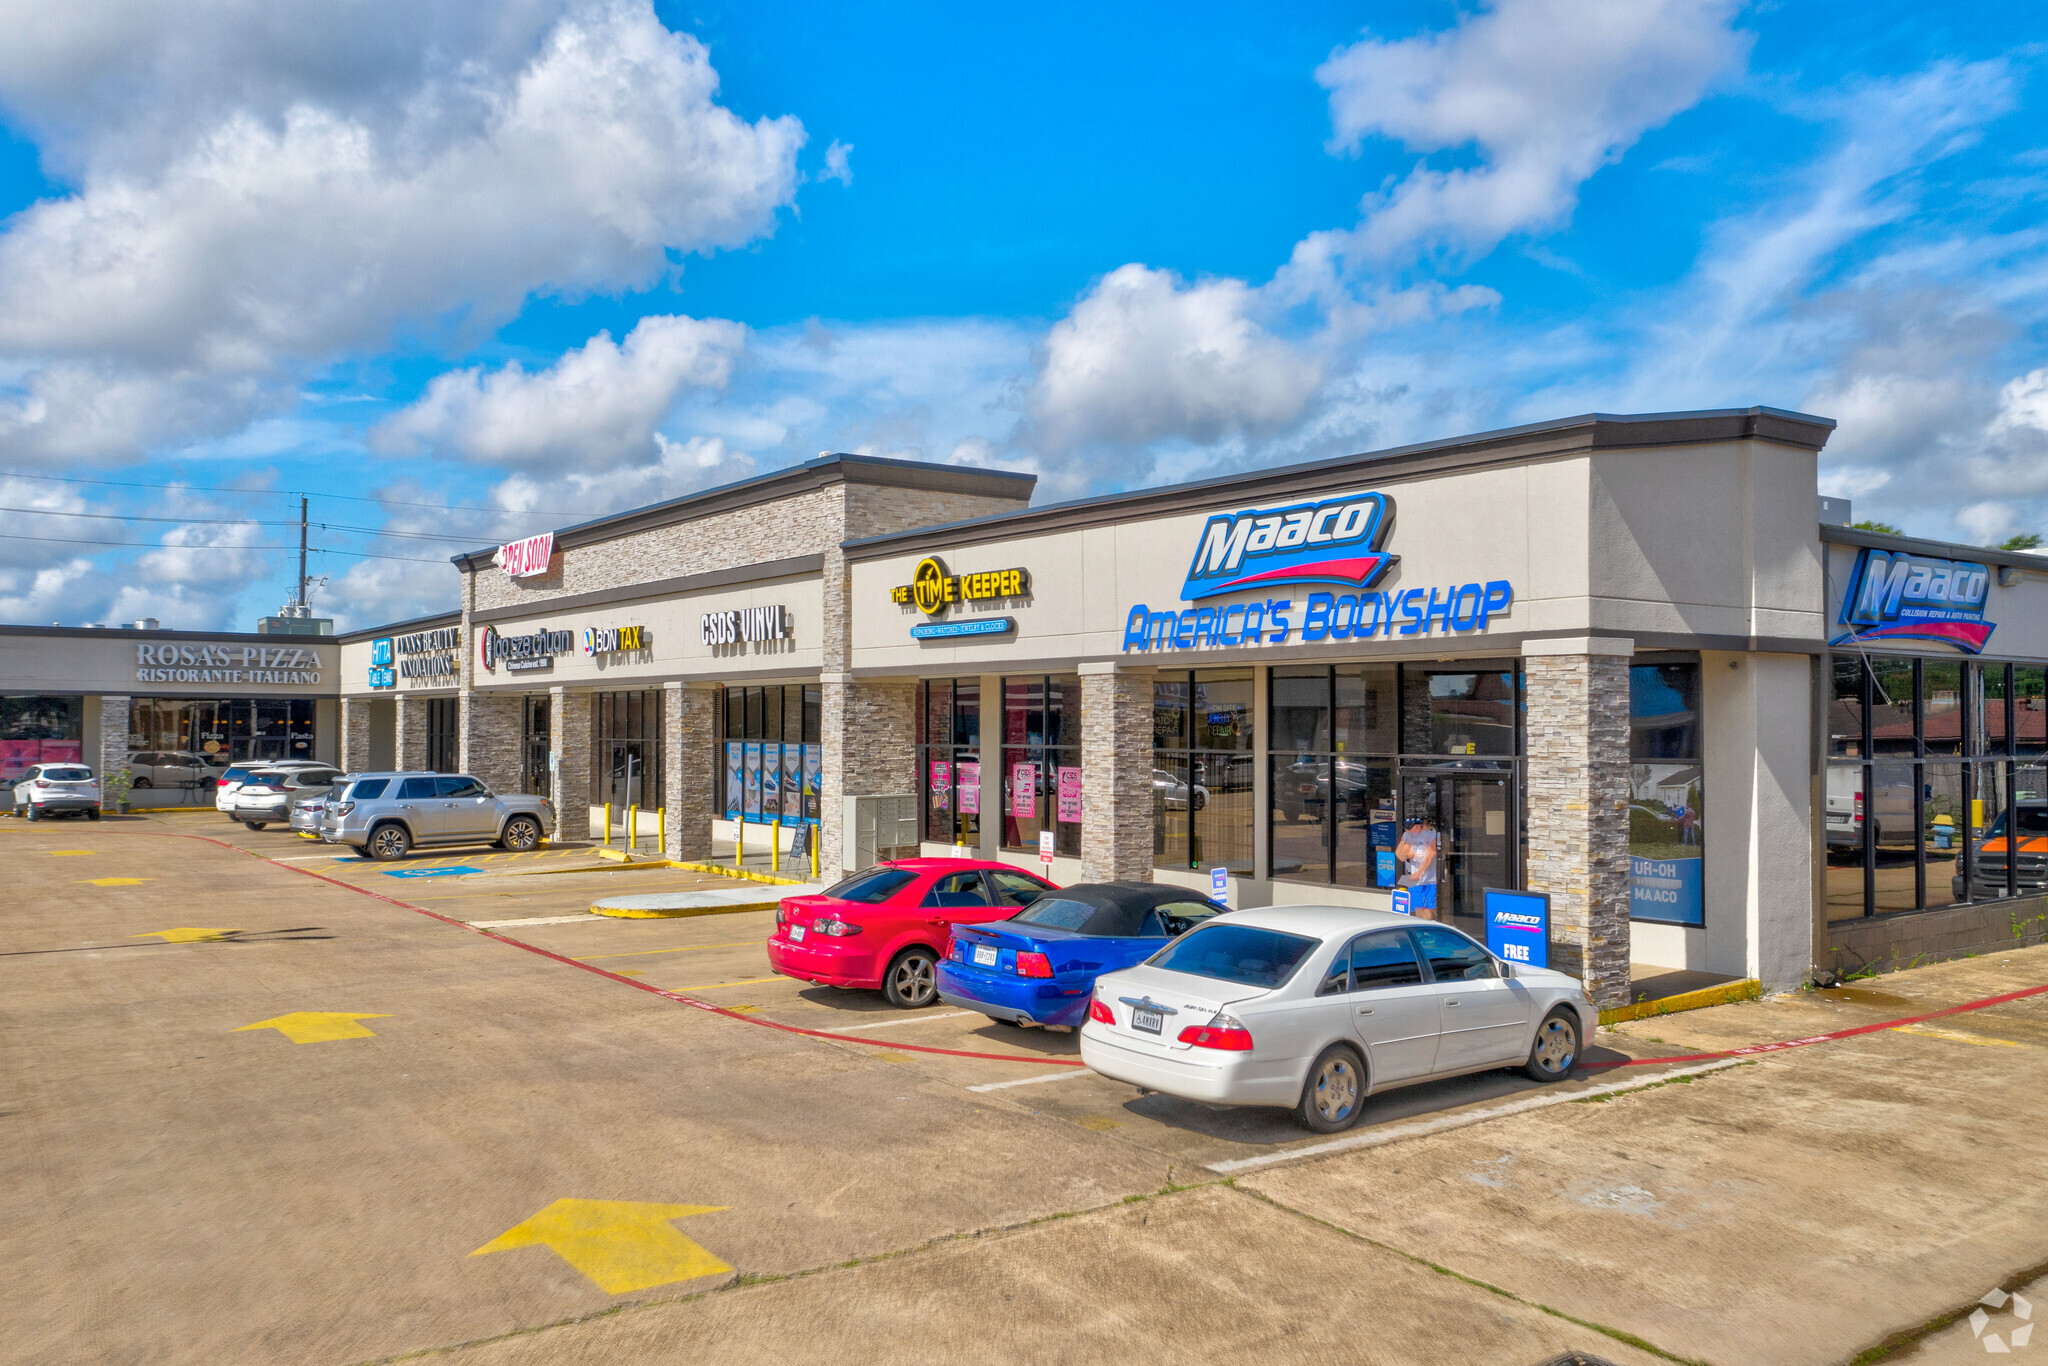 Partners Capital acquires Mason Point Shopping Center in Katy, Texas